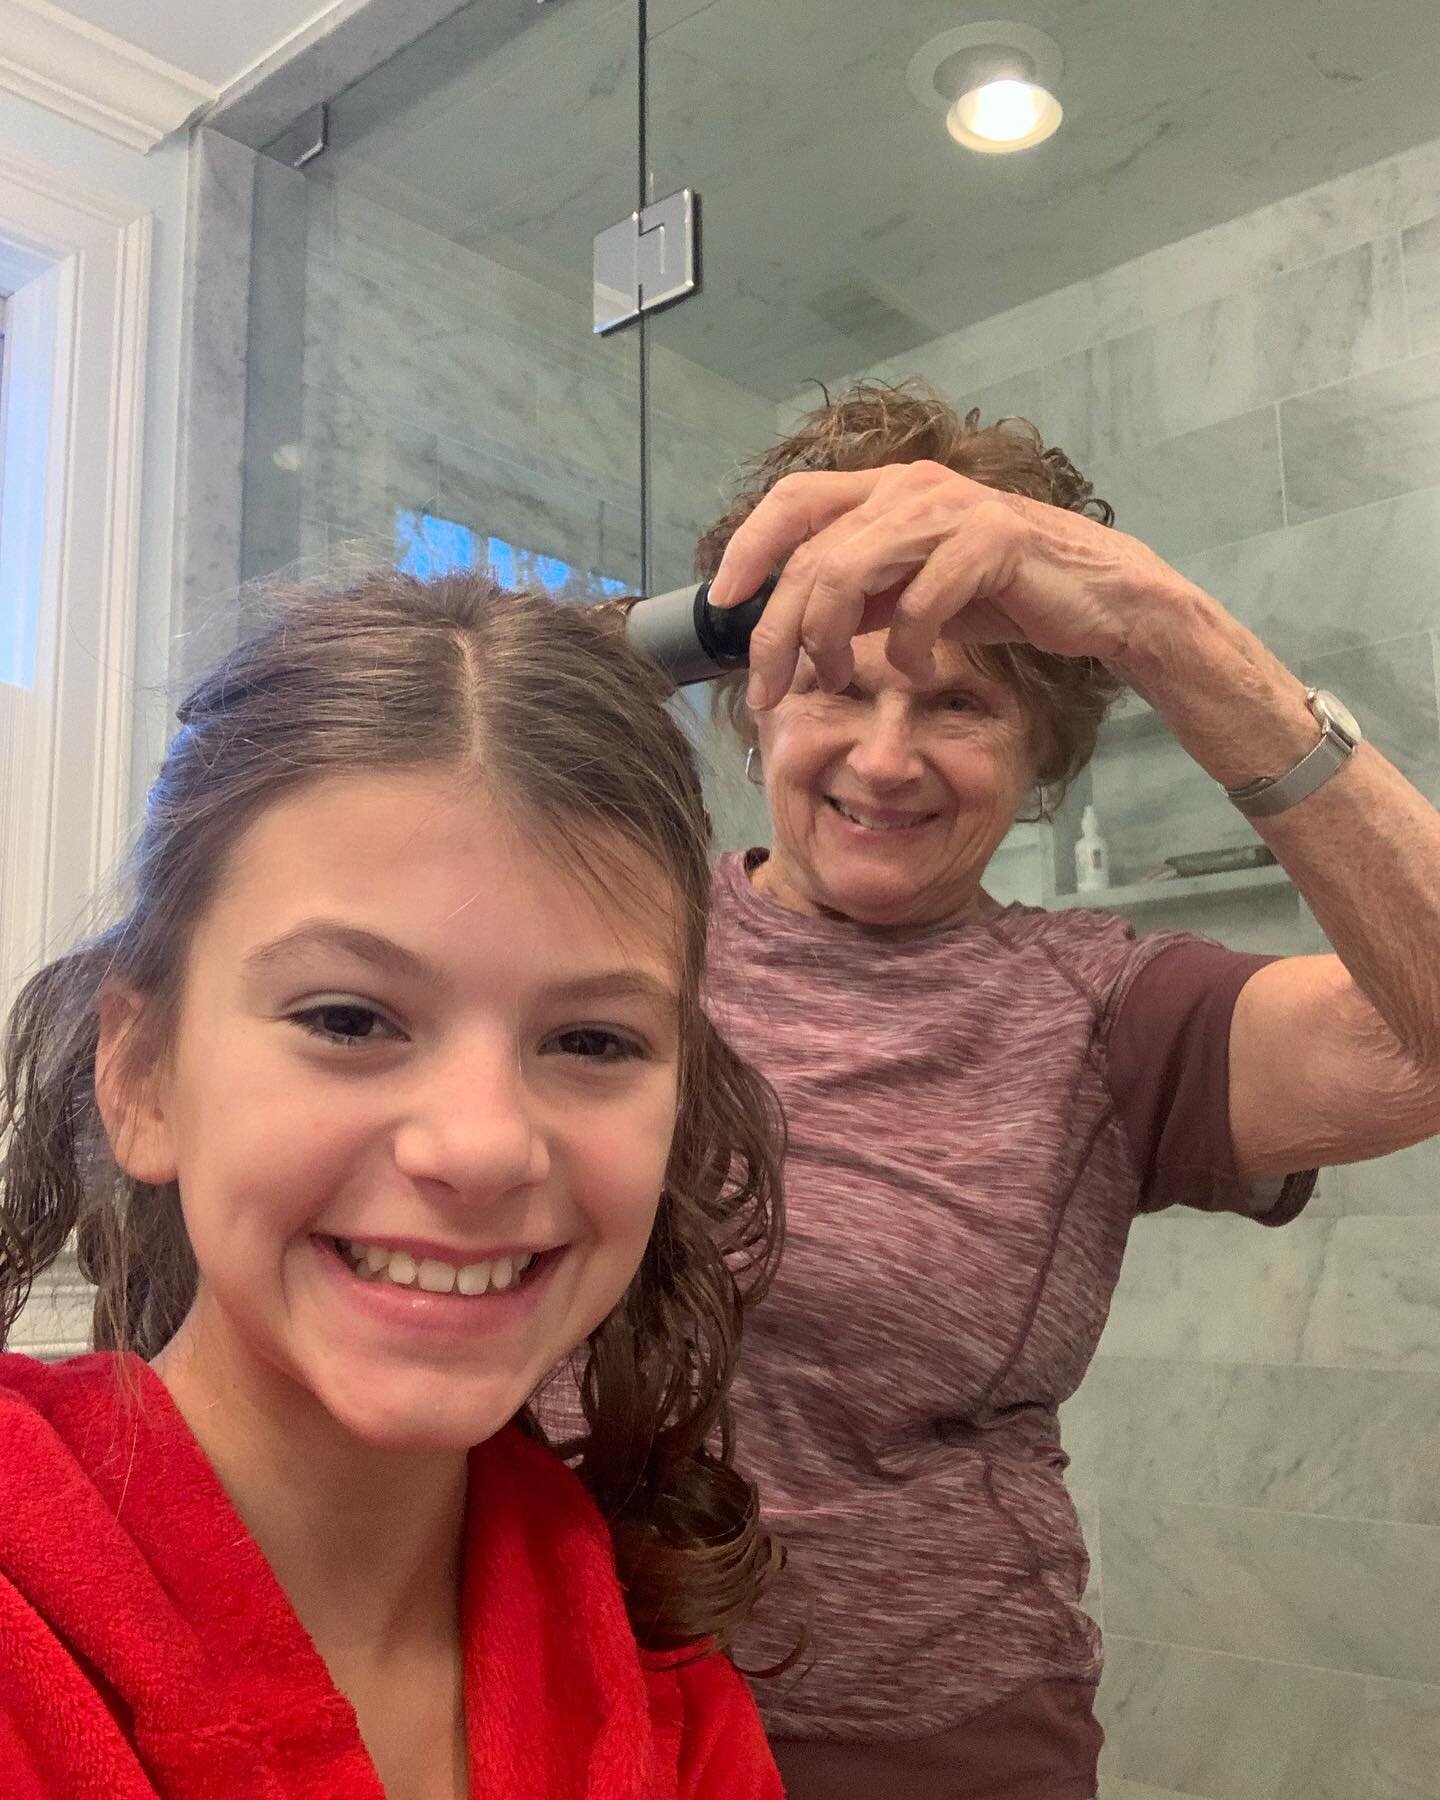 OMG! Our star getting her curls by Gma for the next two performances of &ldquo;Legally Blonde&rdquo; with Winchester Coop Theater. Tix still available for 1pm &amp; 4pm shows today at McCall Middle School. Don&rsquo;t miss it! OMG. #winchestercoopera